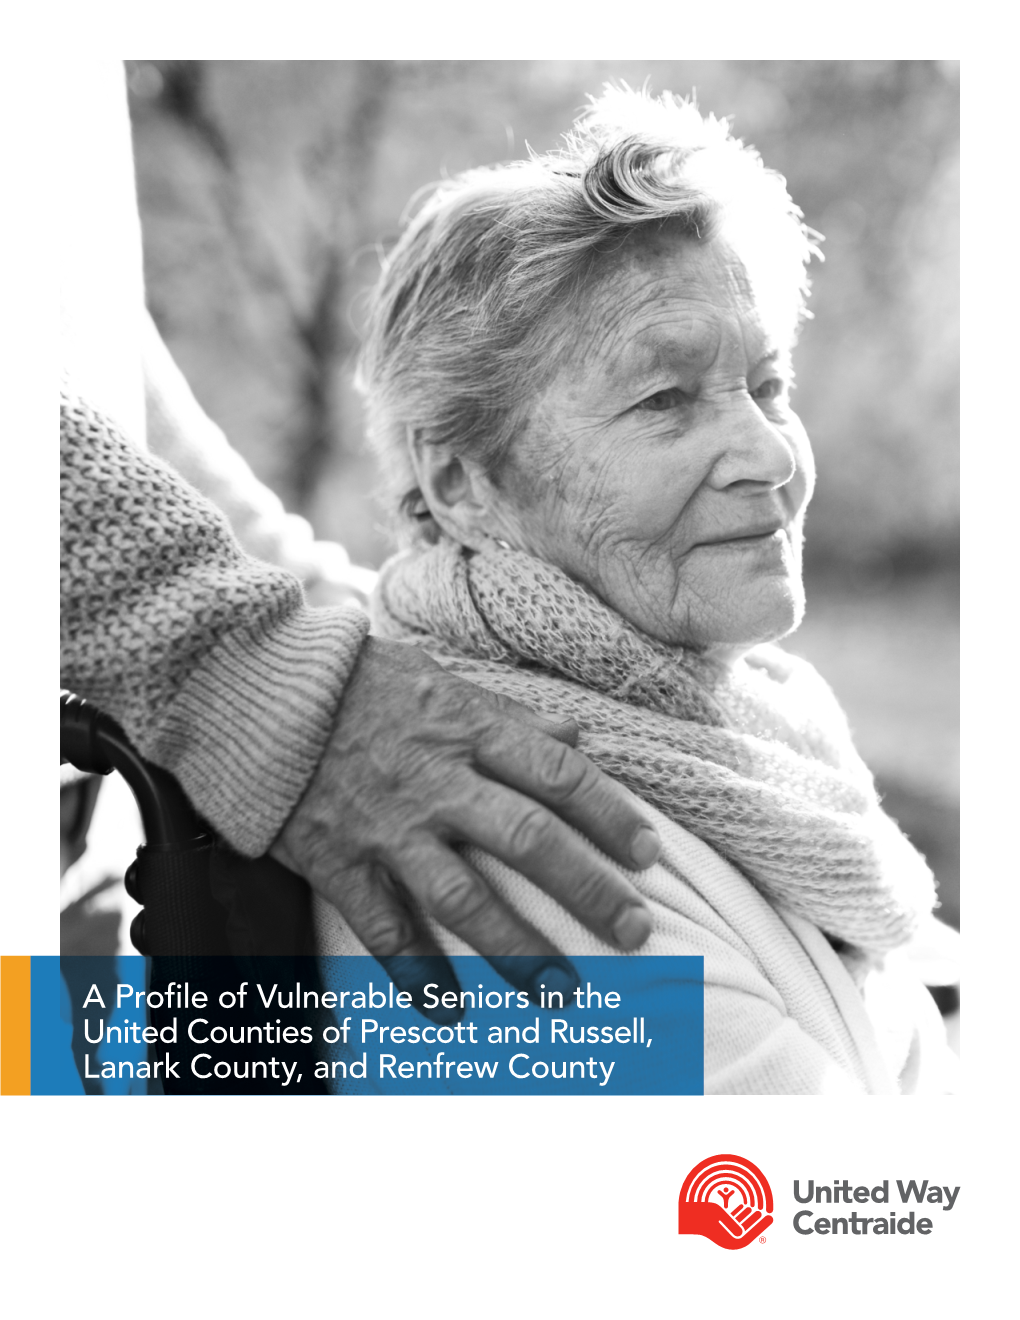 A Profile of Vulnerable Seniors in the United Counties of Prescott And